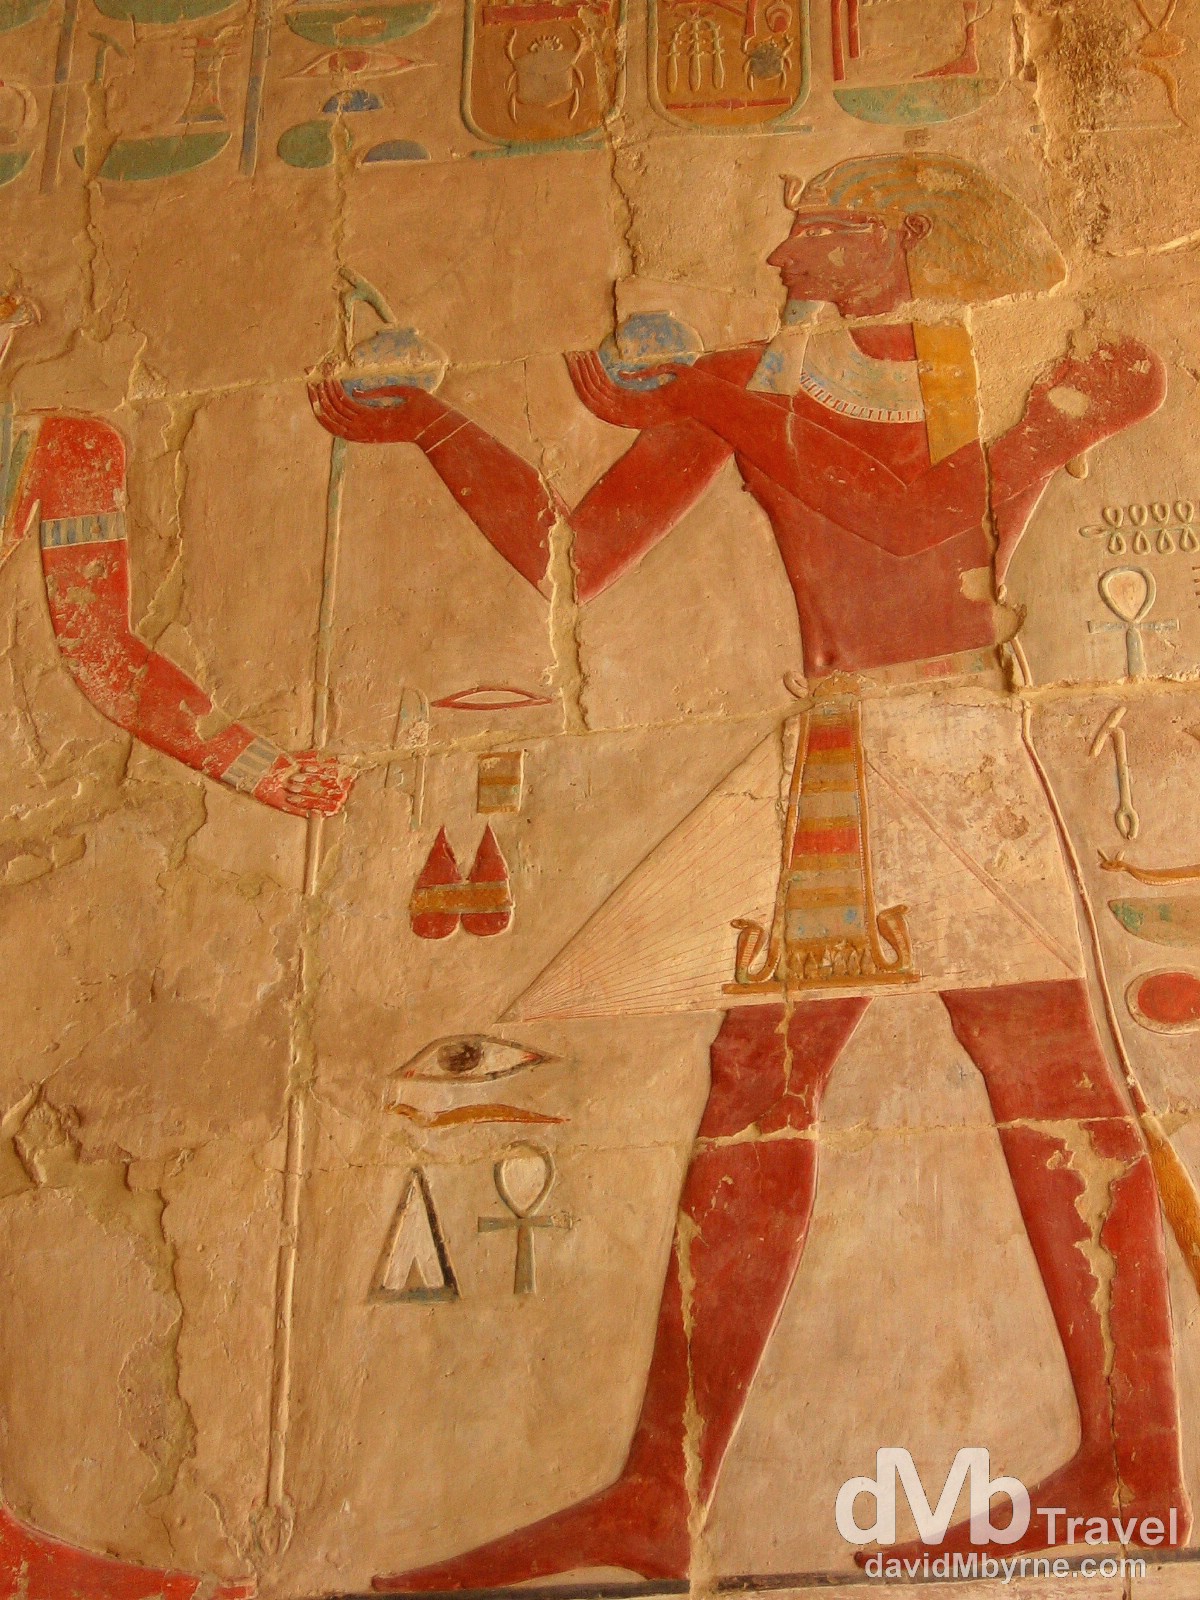 Ancient Egyptian symbols on the walls of the Funerary Temple of Hatshepsut in Luxor, Egypt. April 12th 2008.